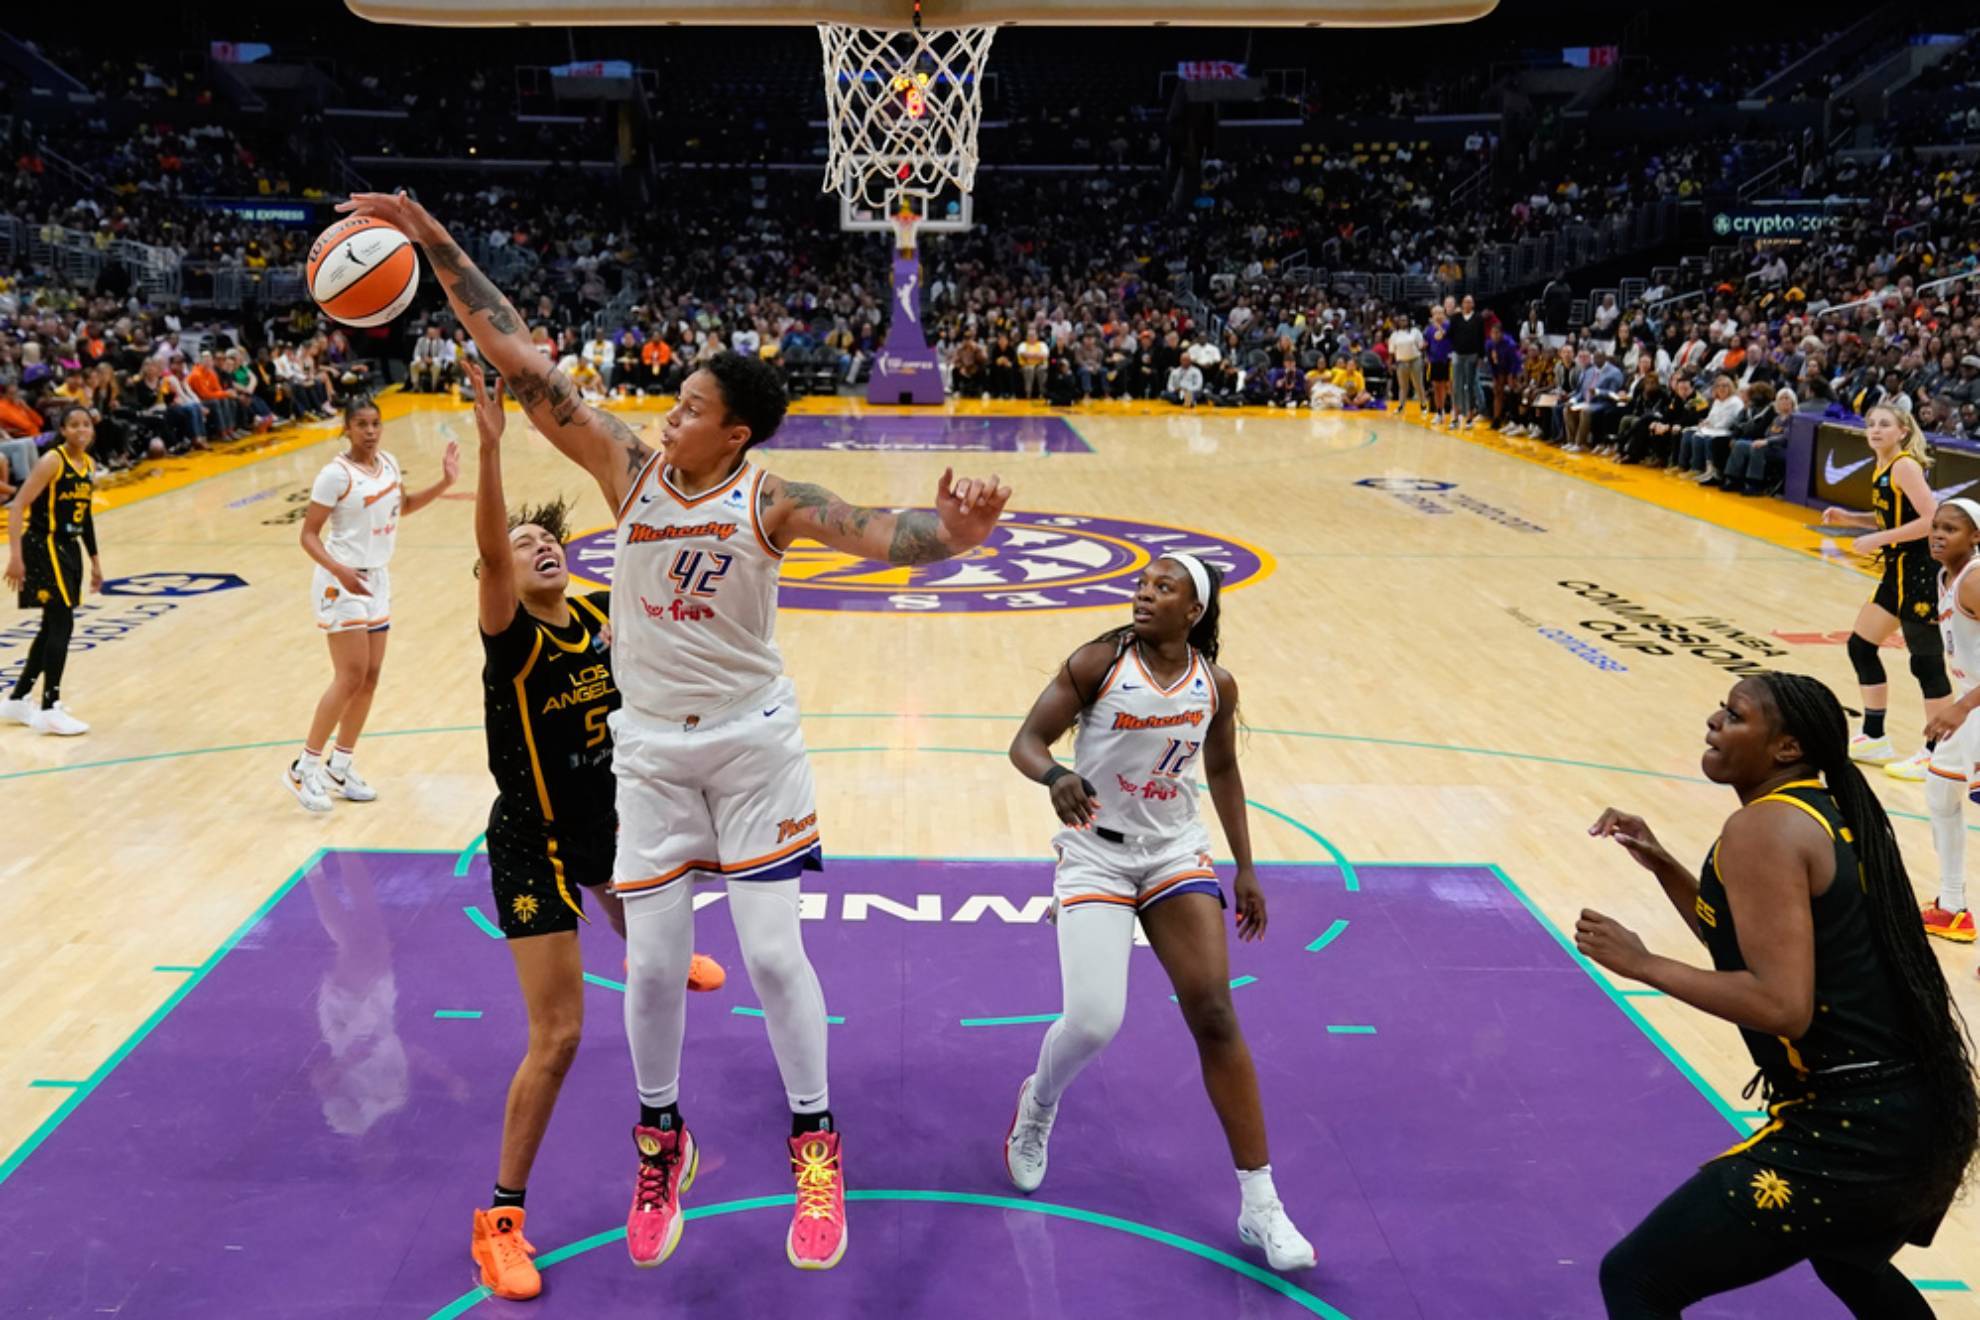 Phoenix Mercury center Brittney Griner (42) blocks a shot by Los Angeles Sparks guard Dearica Hamby (5) during the second half of a WNBA basketball game in Los Angeles, Friday, May 19, 2023.